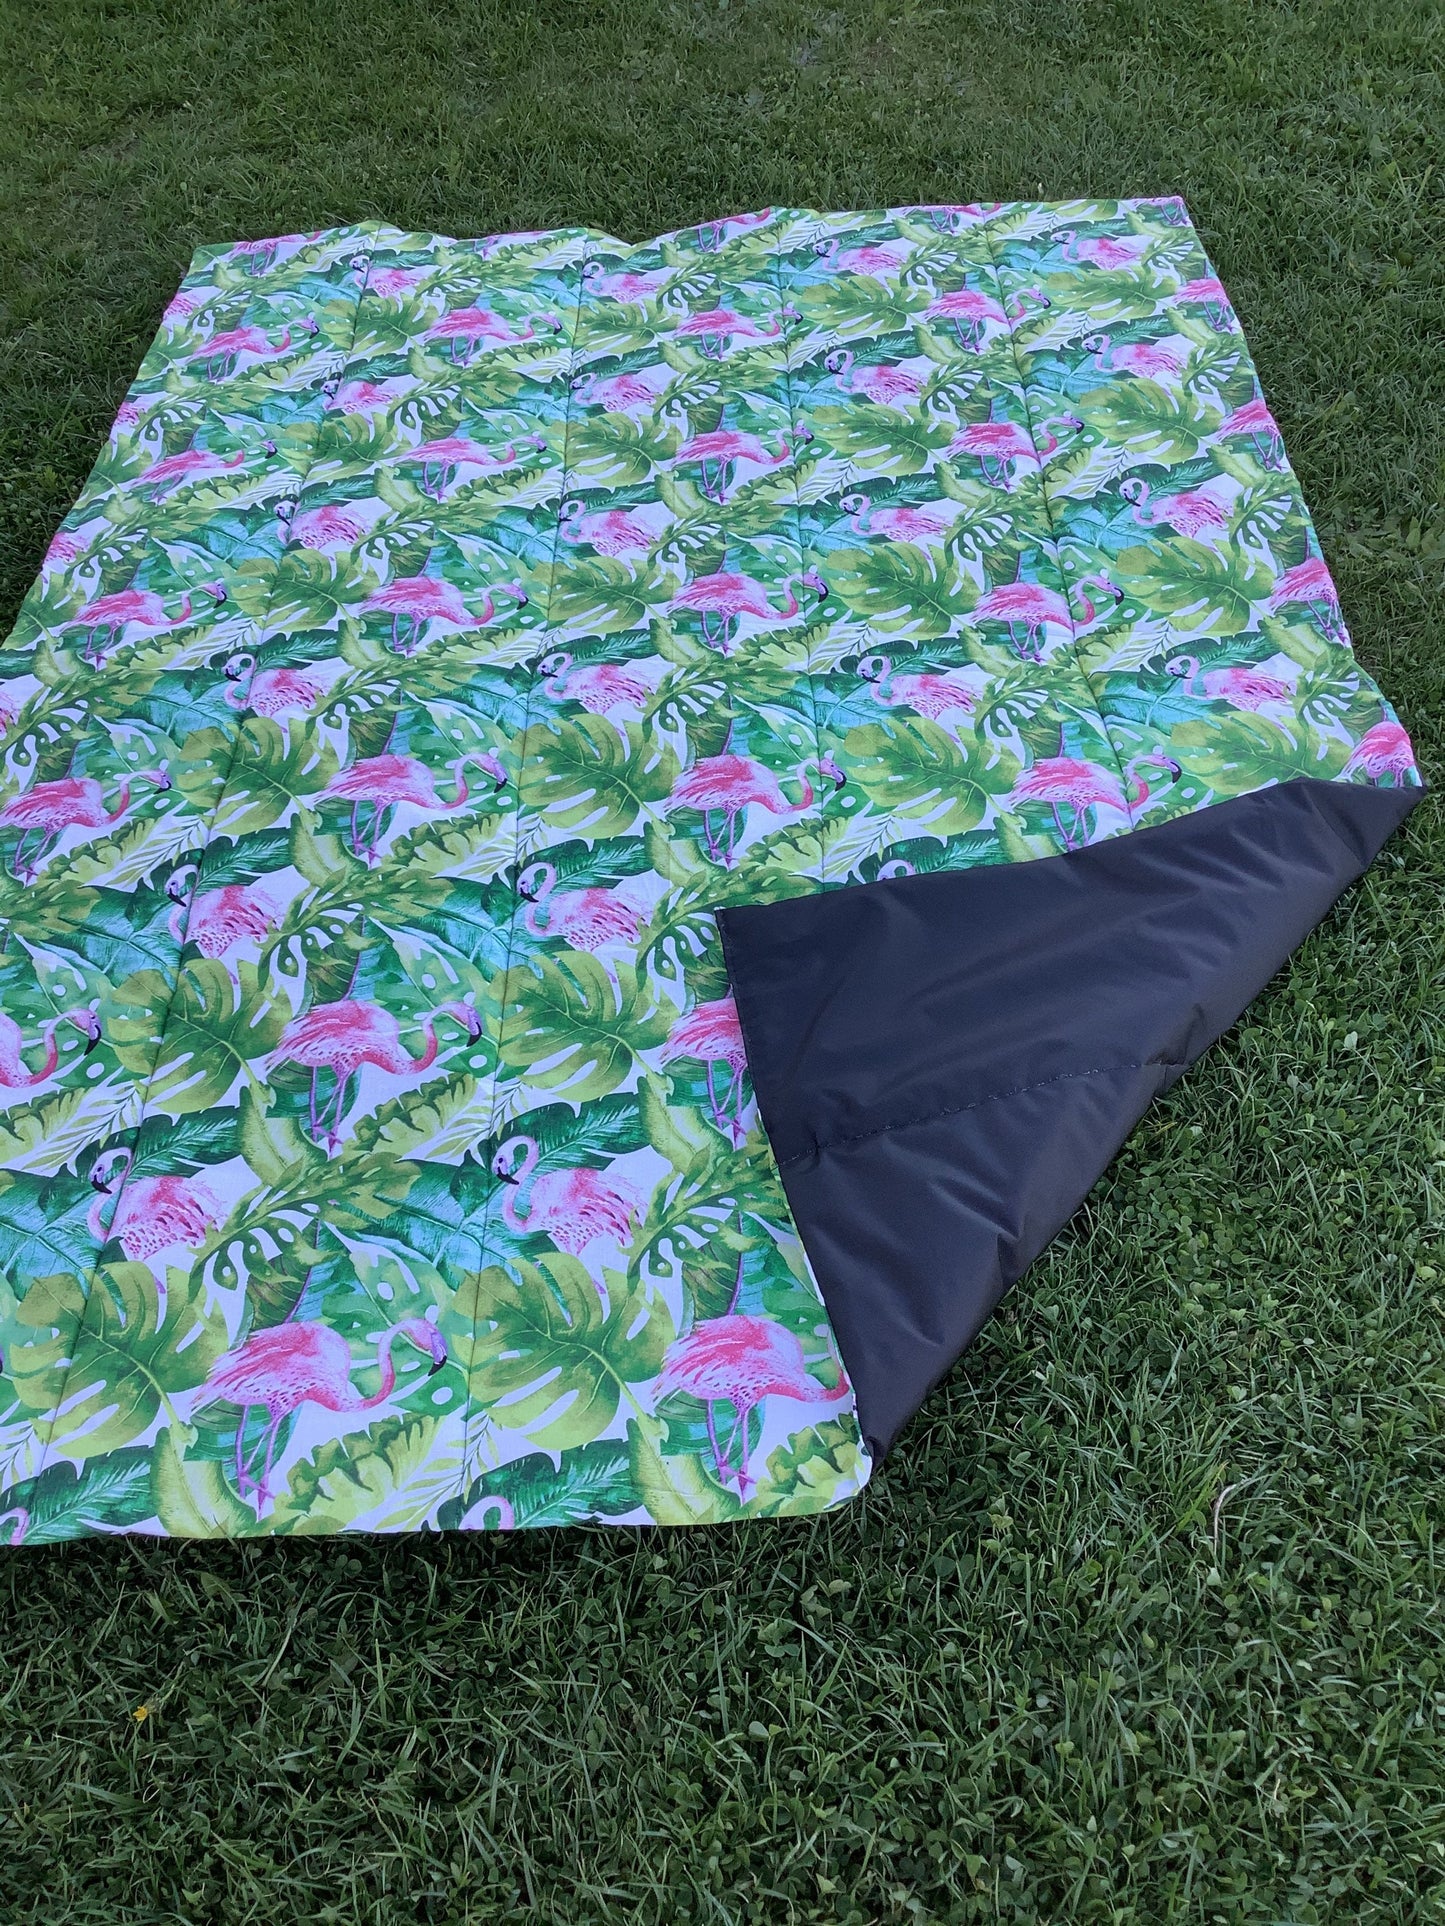 Picnic Blanket Waterproof mat, Big and very pretty rest outdoor Lawn or Beach Blanket, picnic blanket waterproof, Rest mat cotton colorful